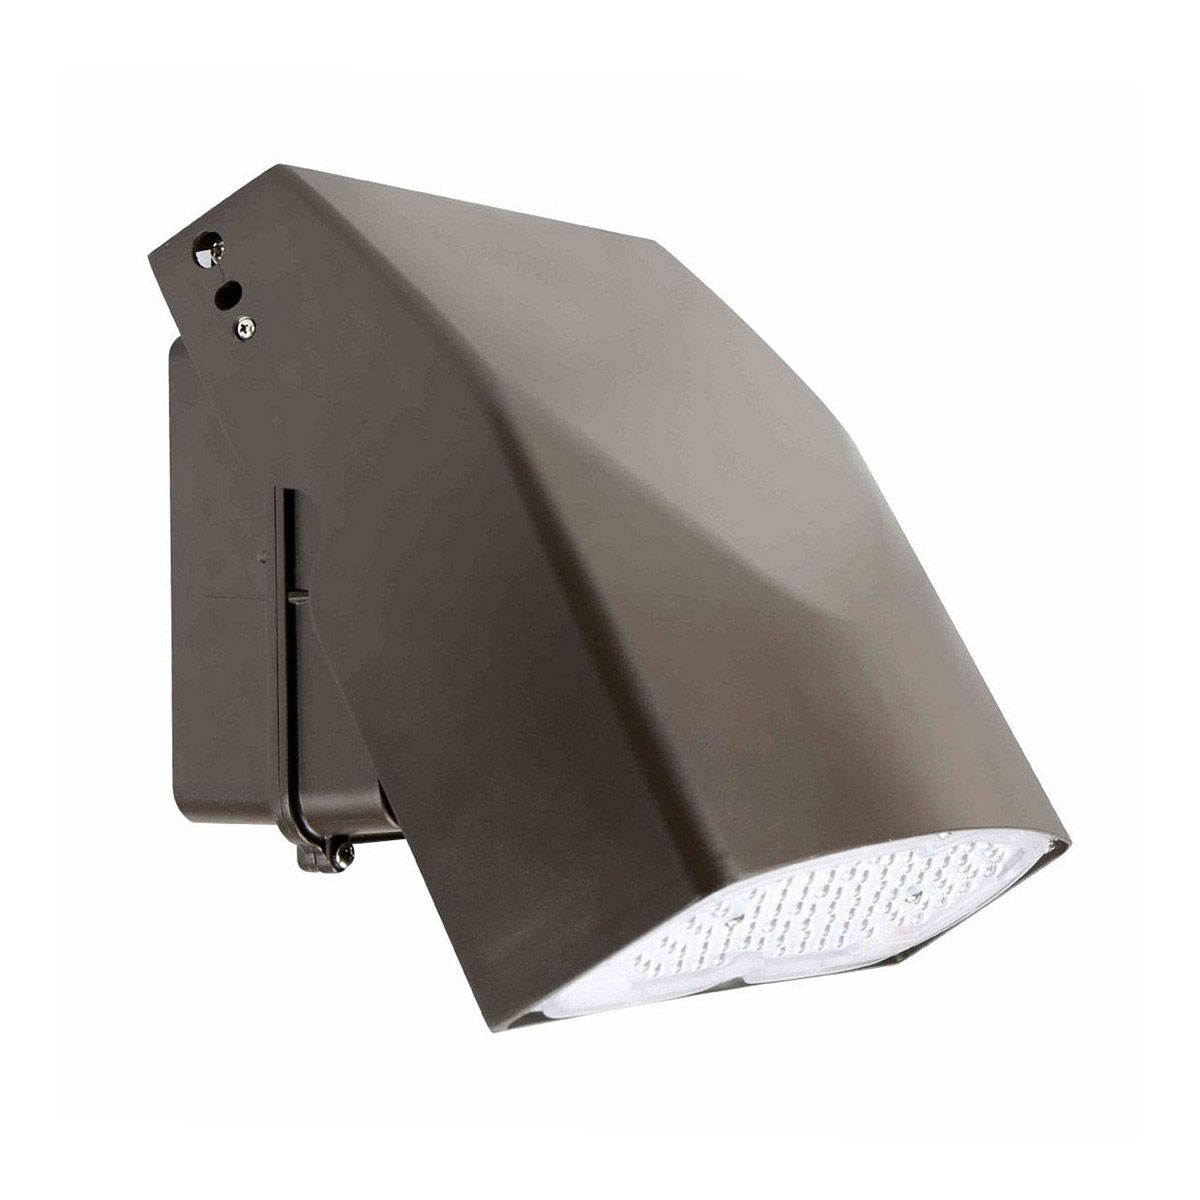 40W Full Cutoff LED Wall Pack with Adjustable Head